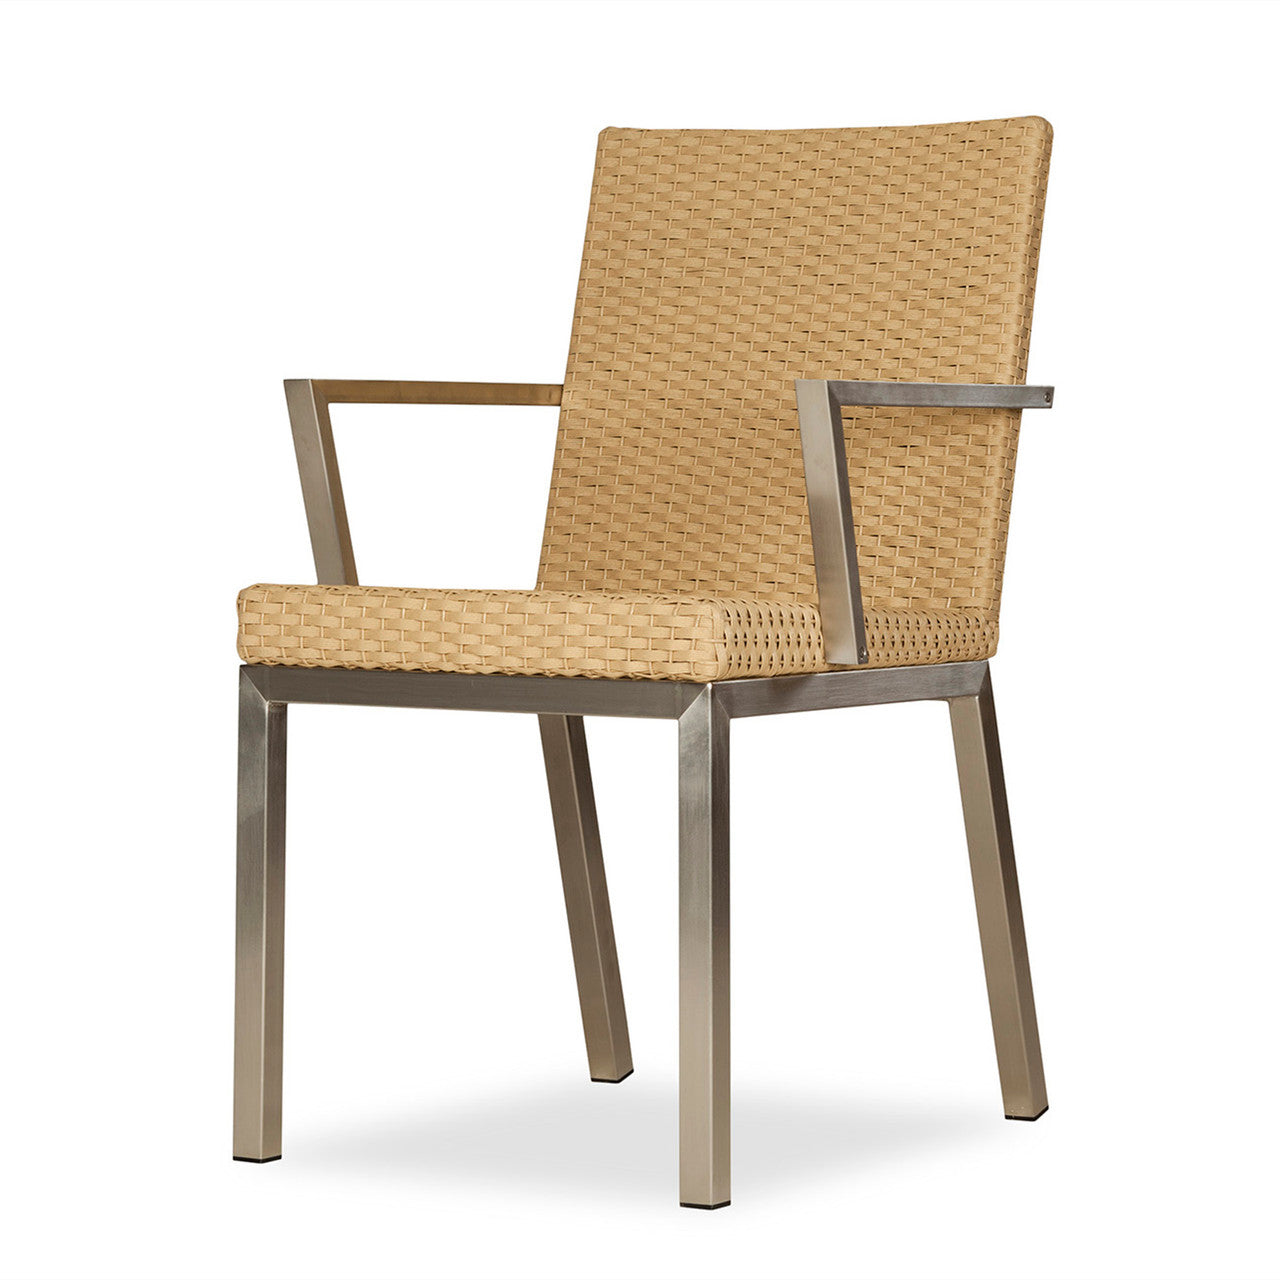 Lloyd Flanders Elements Wicker Dining Arm Chair With Stainless Steel Arms and Base